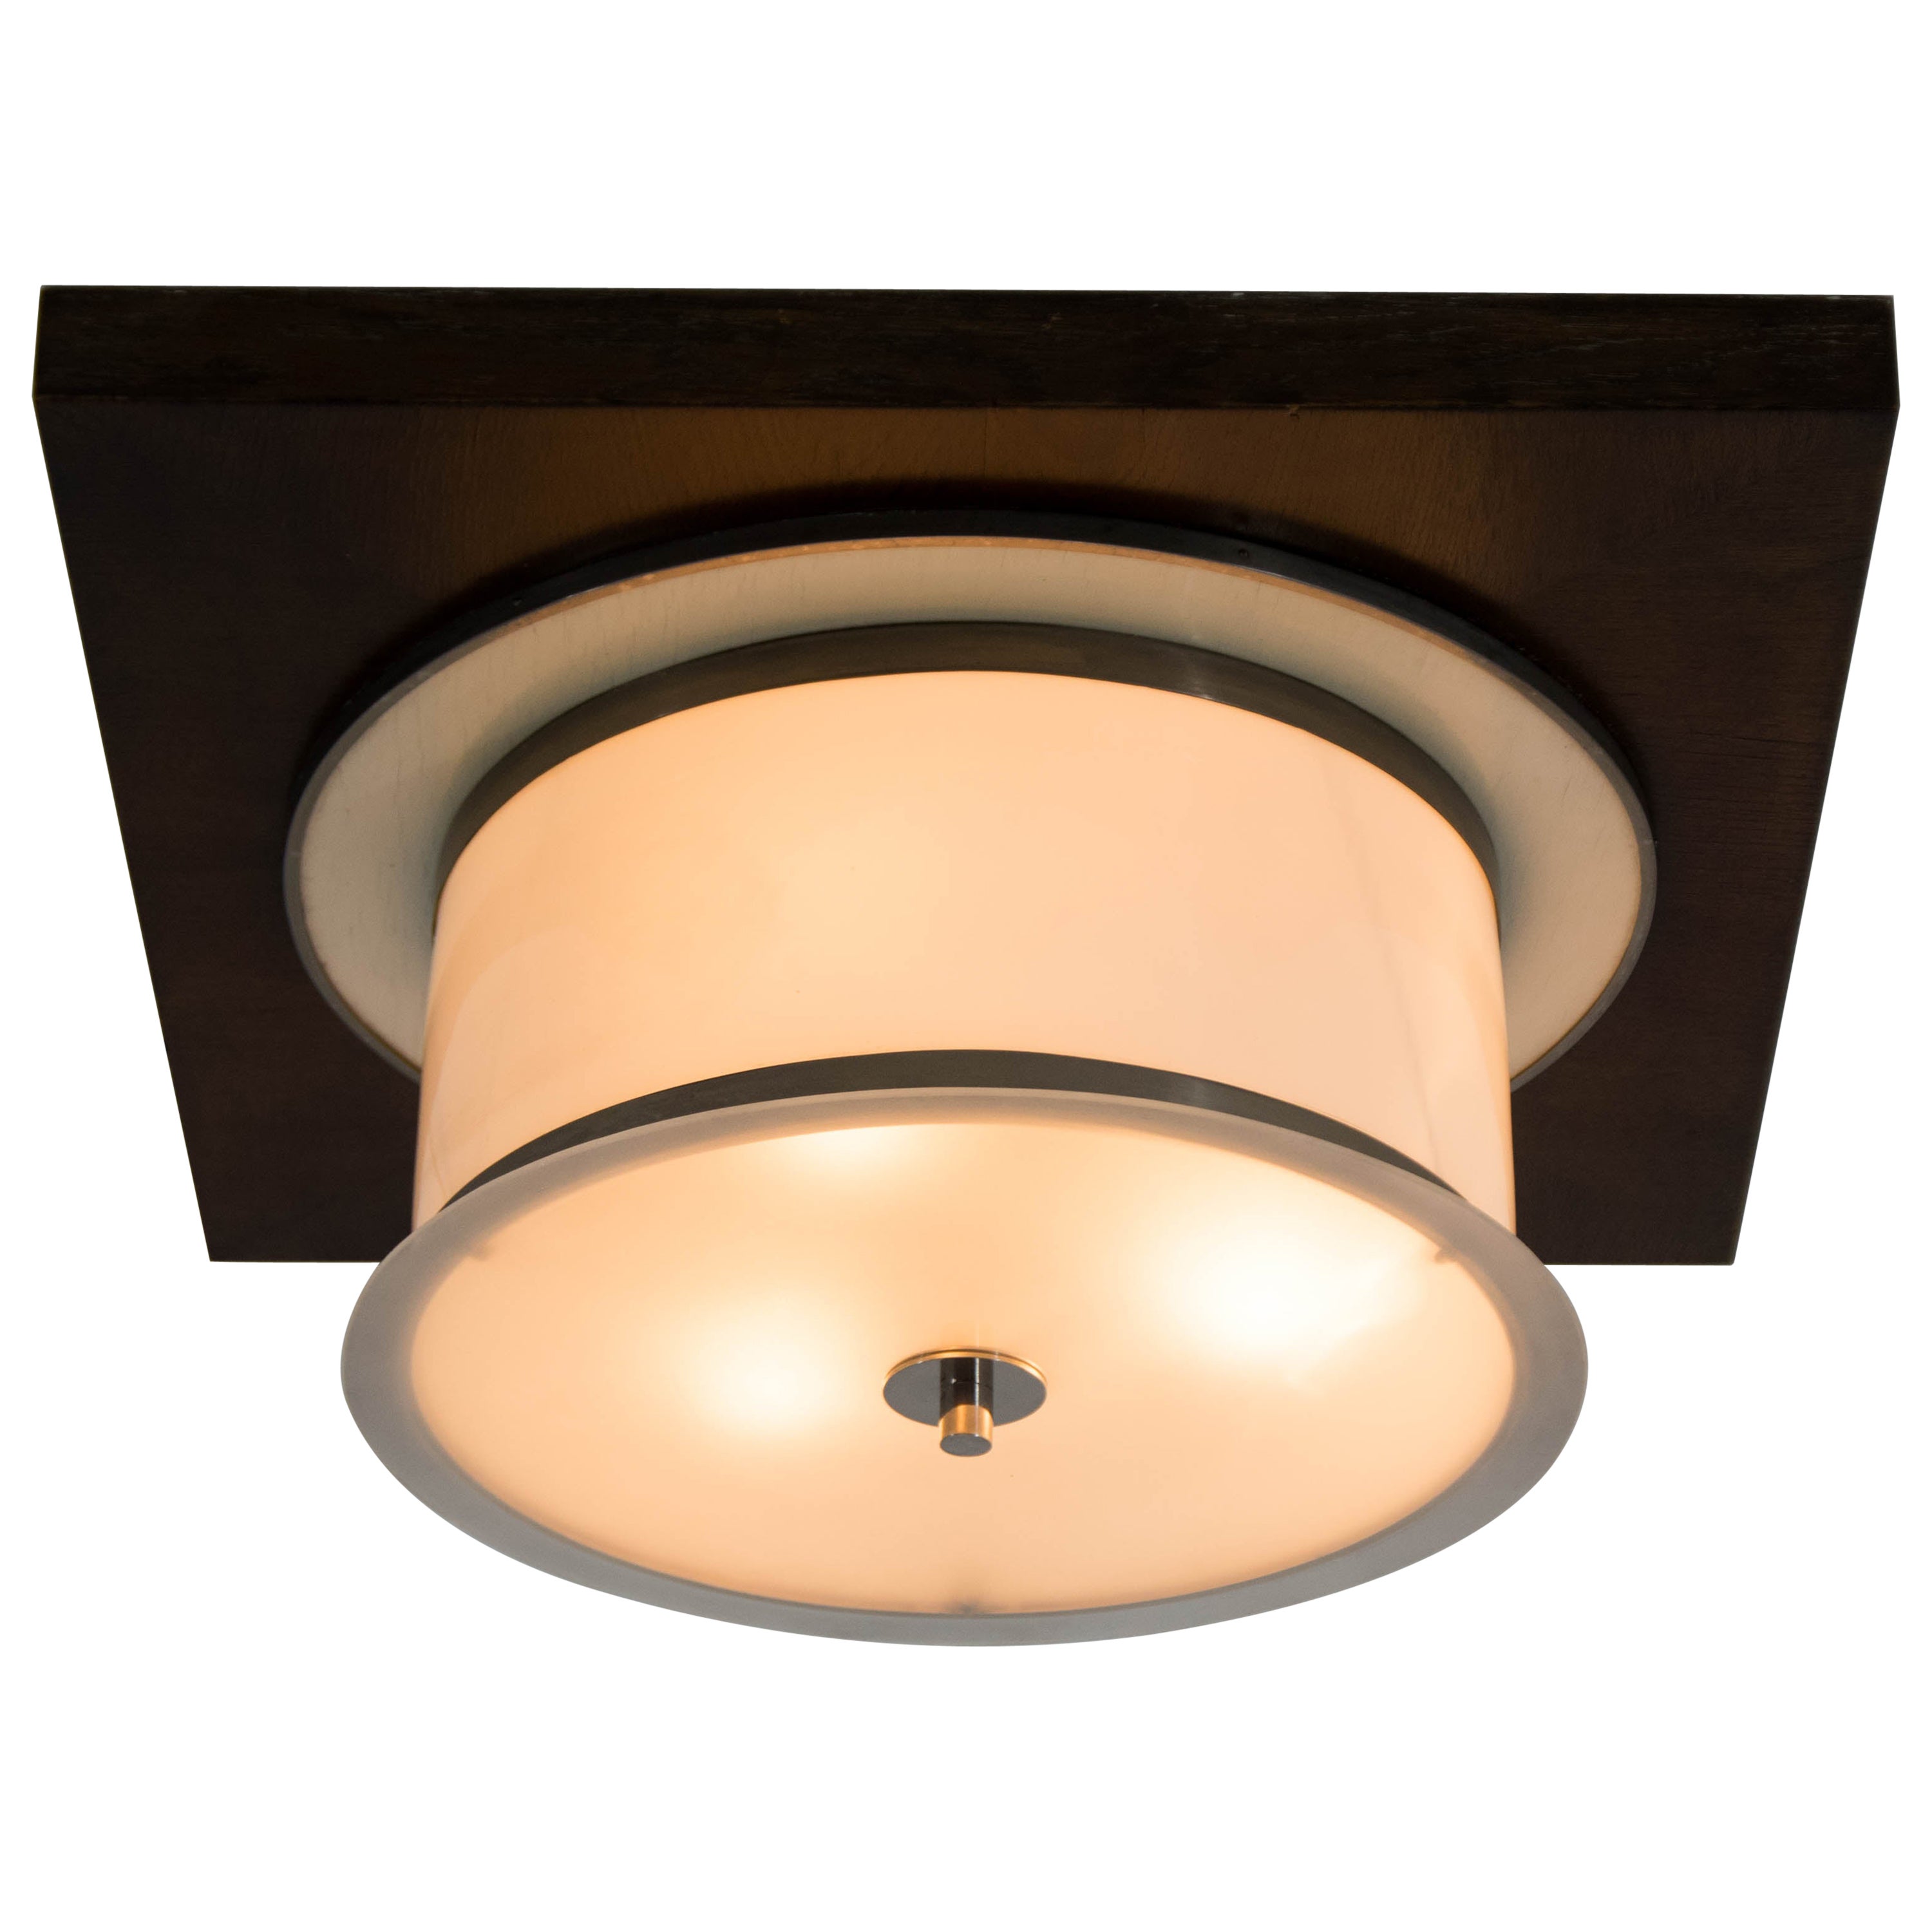 Extremely Rare Functionalist Flush Mount, 1930s